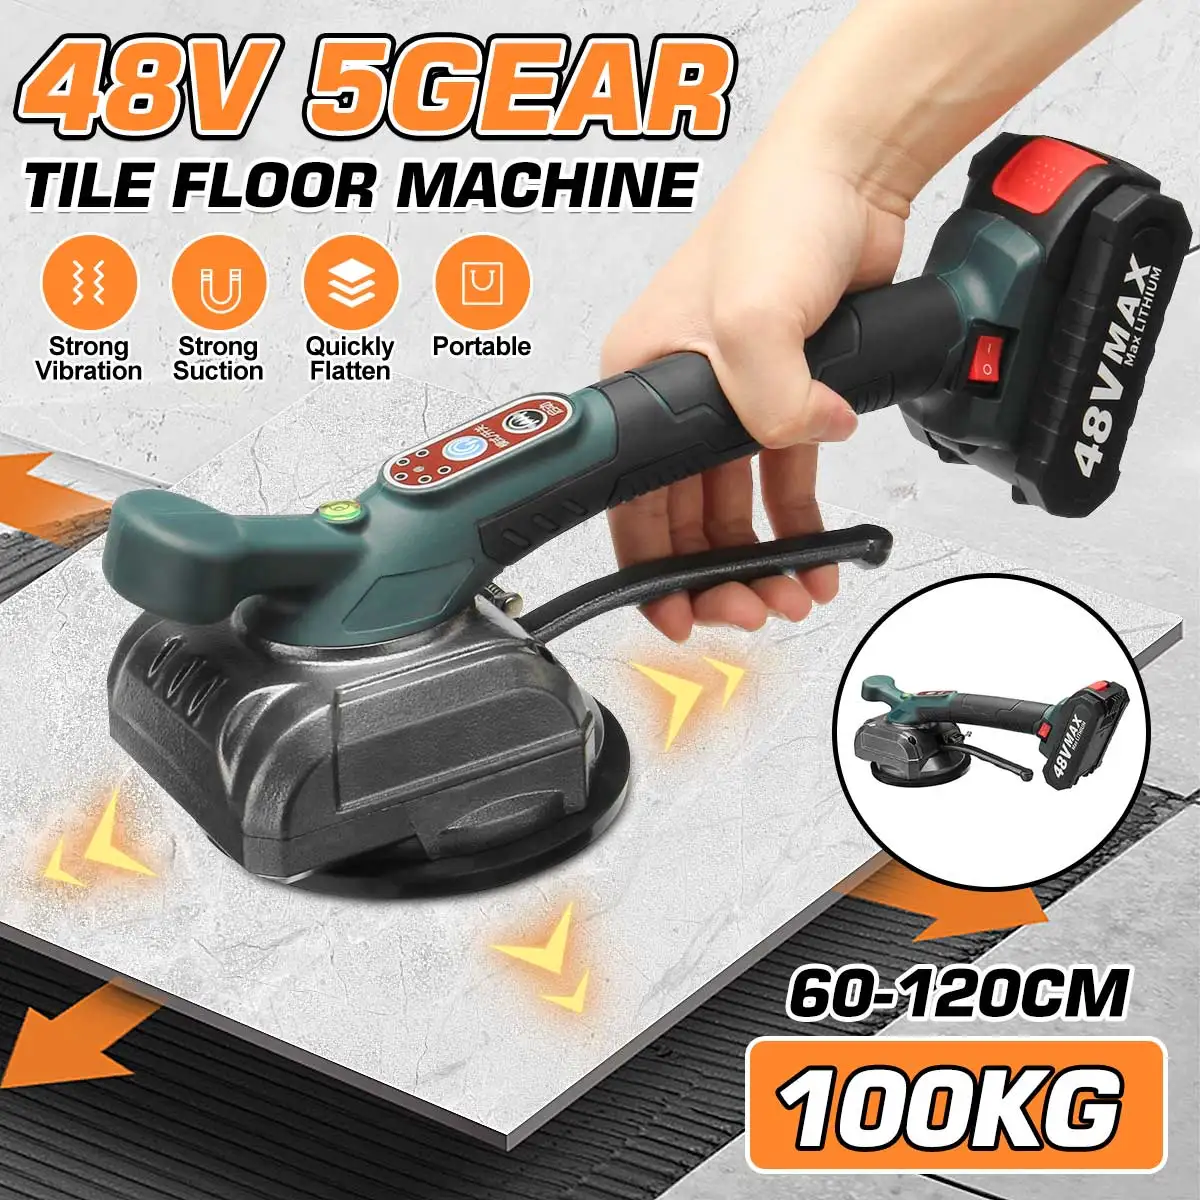 48V Tile Vibrator Tiling Machine for 120x120cm Tiles with 2 Battery Floor Laying Machine Automatic Leveling Plastering Tool